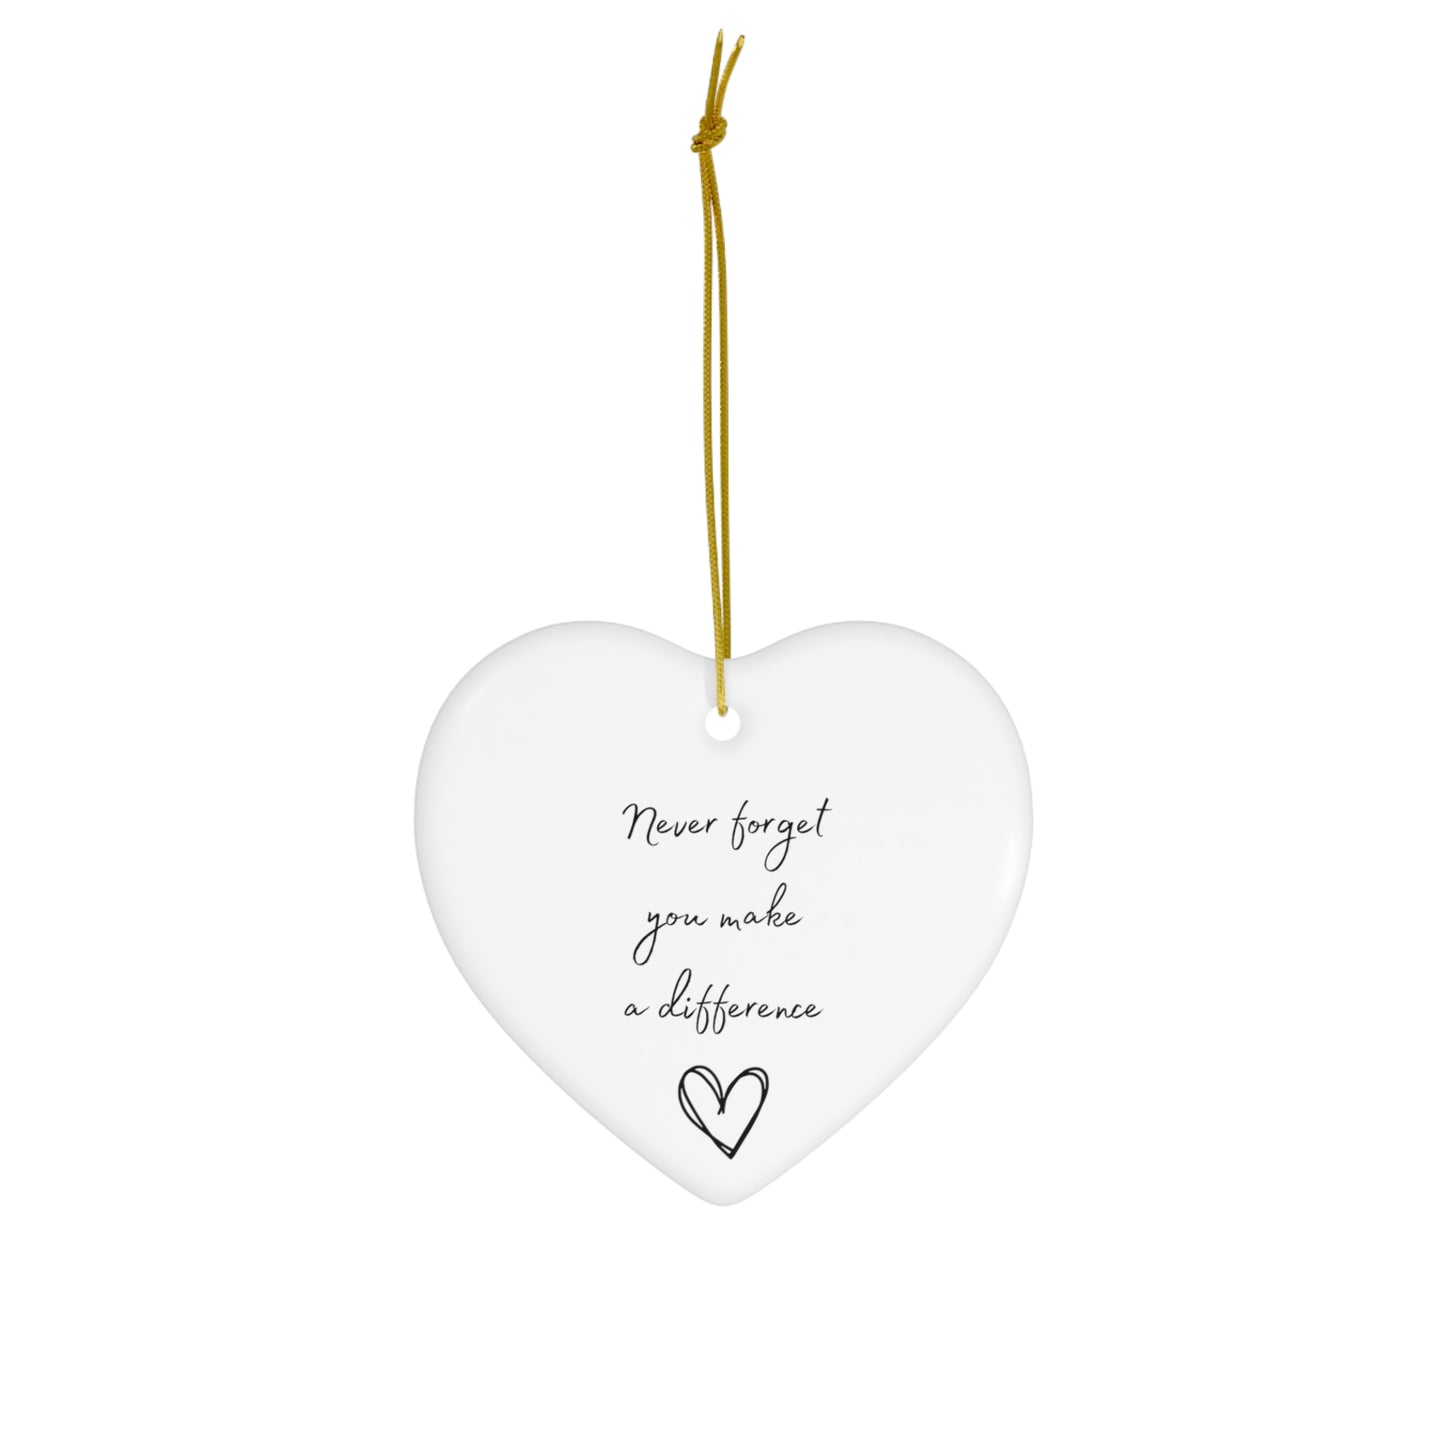 Never Forget You make a Difference | Ceramic Heart Ornament |